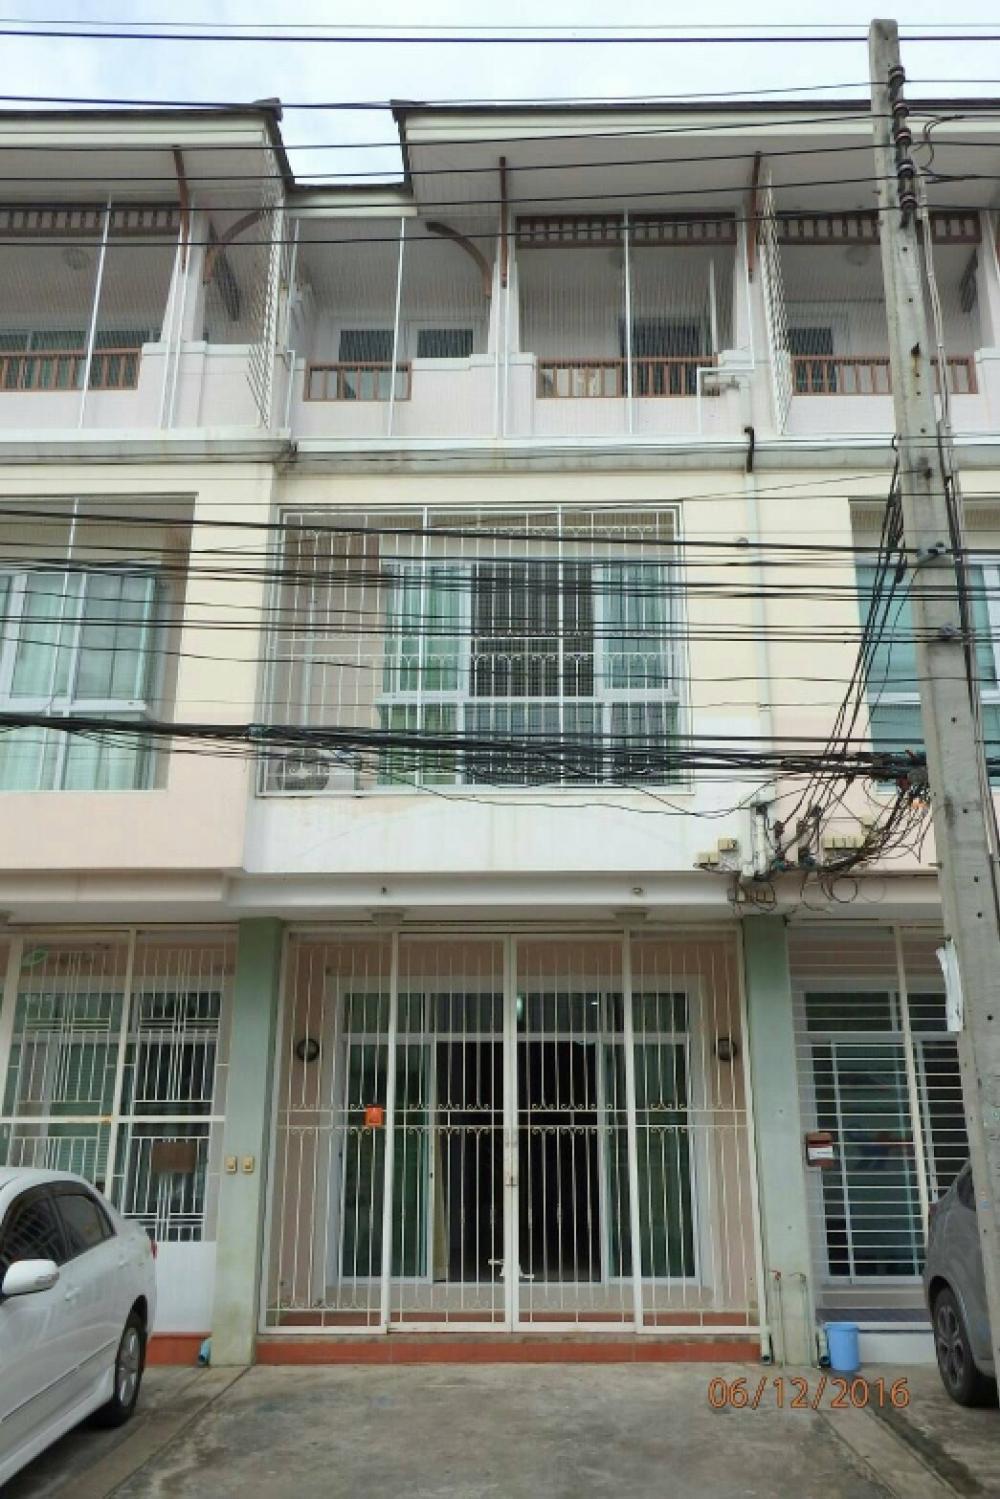 For RentTownhouseLadprao, Central Ladprao : Townhouse for rent, 3 floors, area 25 square meters, 3 bedrooms, 3 bathrooms, 4 air conditioners, partially furnished, house ready to move in, Lat Phrao Road 31, rental price 20,000 baht/view.